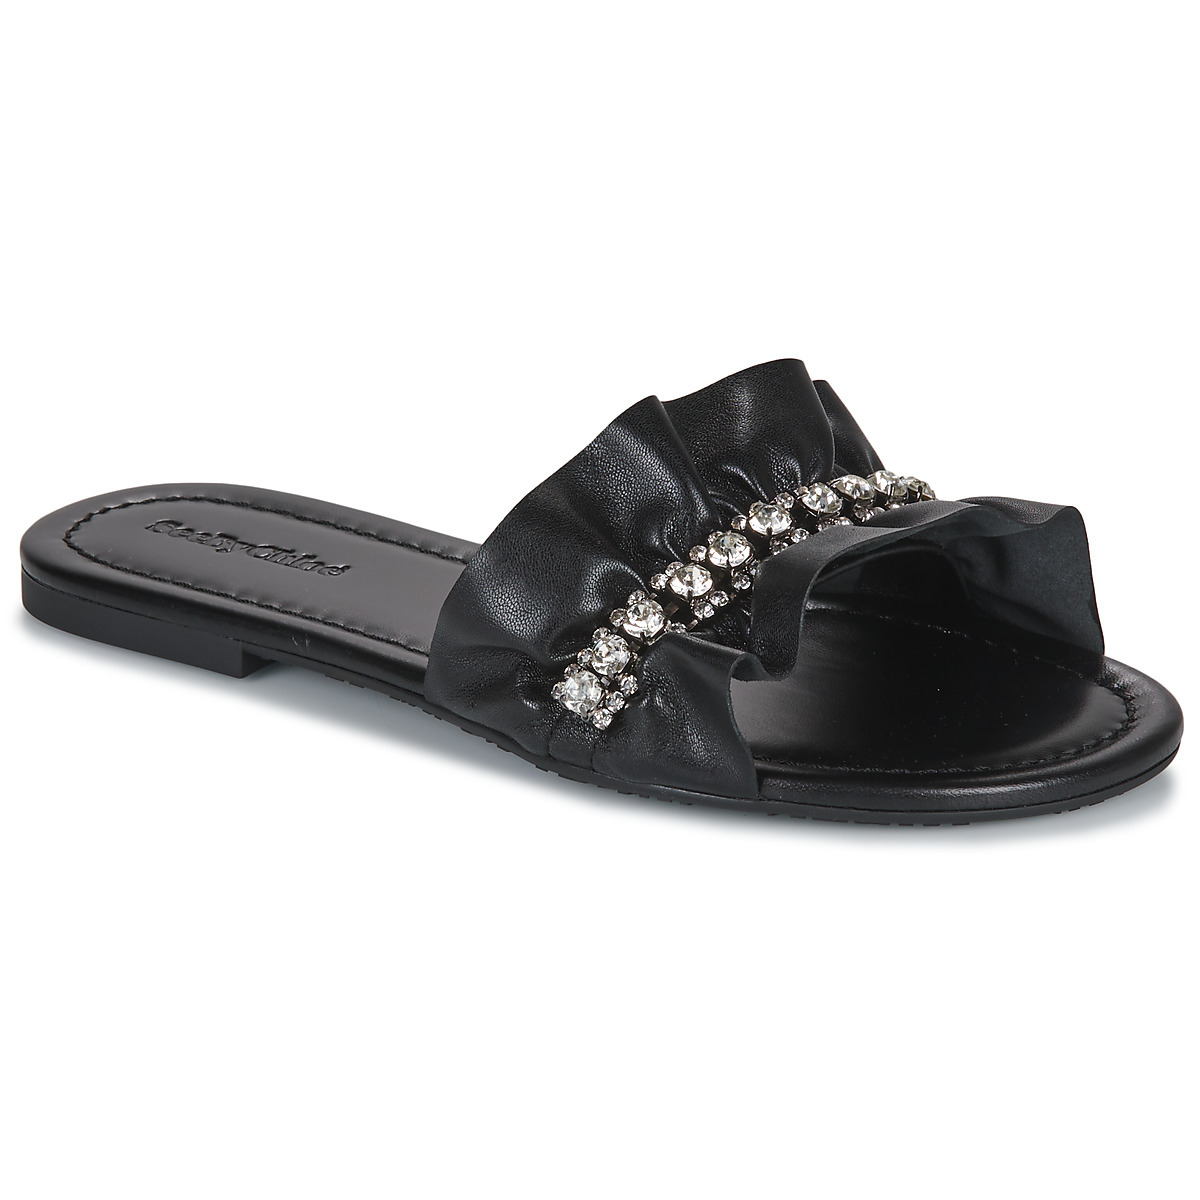 Spartoo - Woman Slippers in Black by Chloé GOOFASH